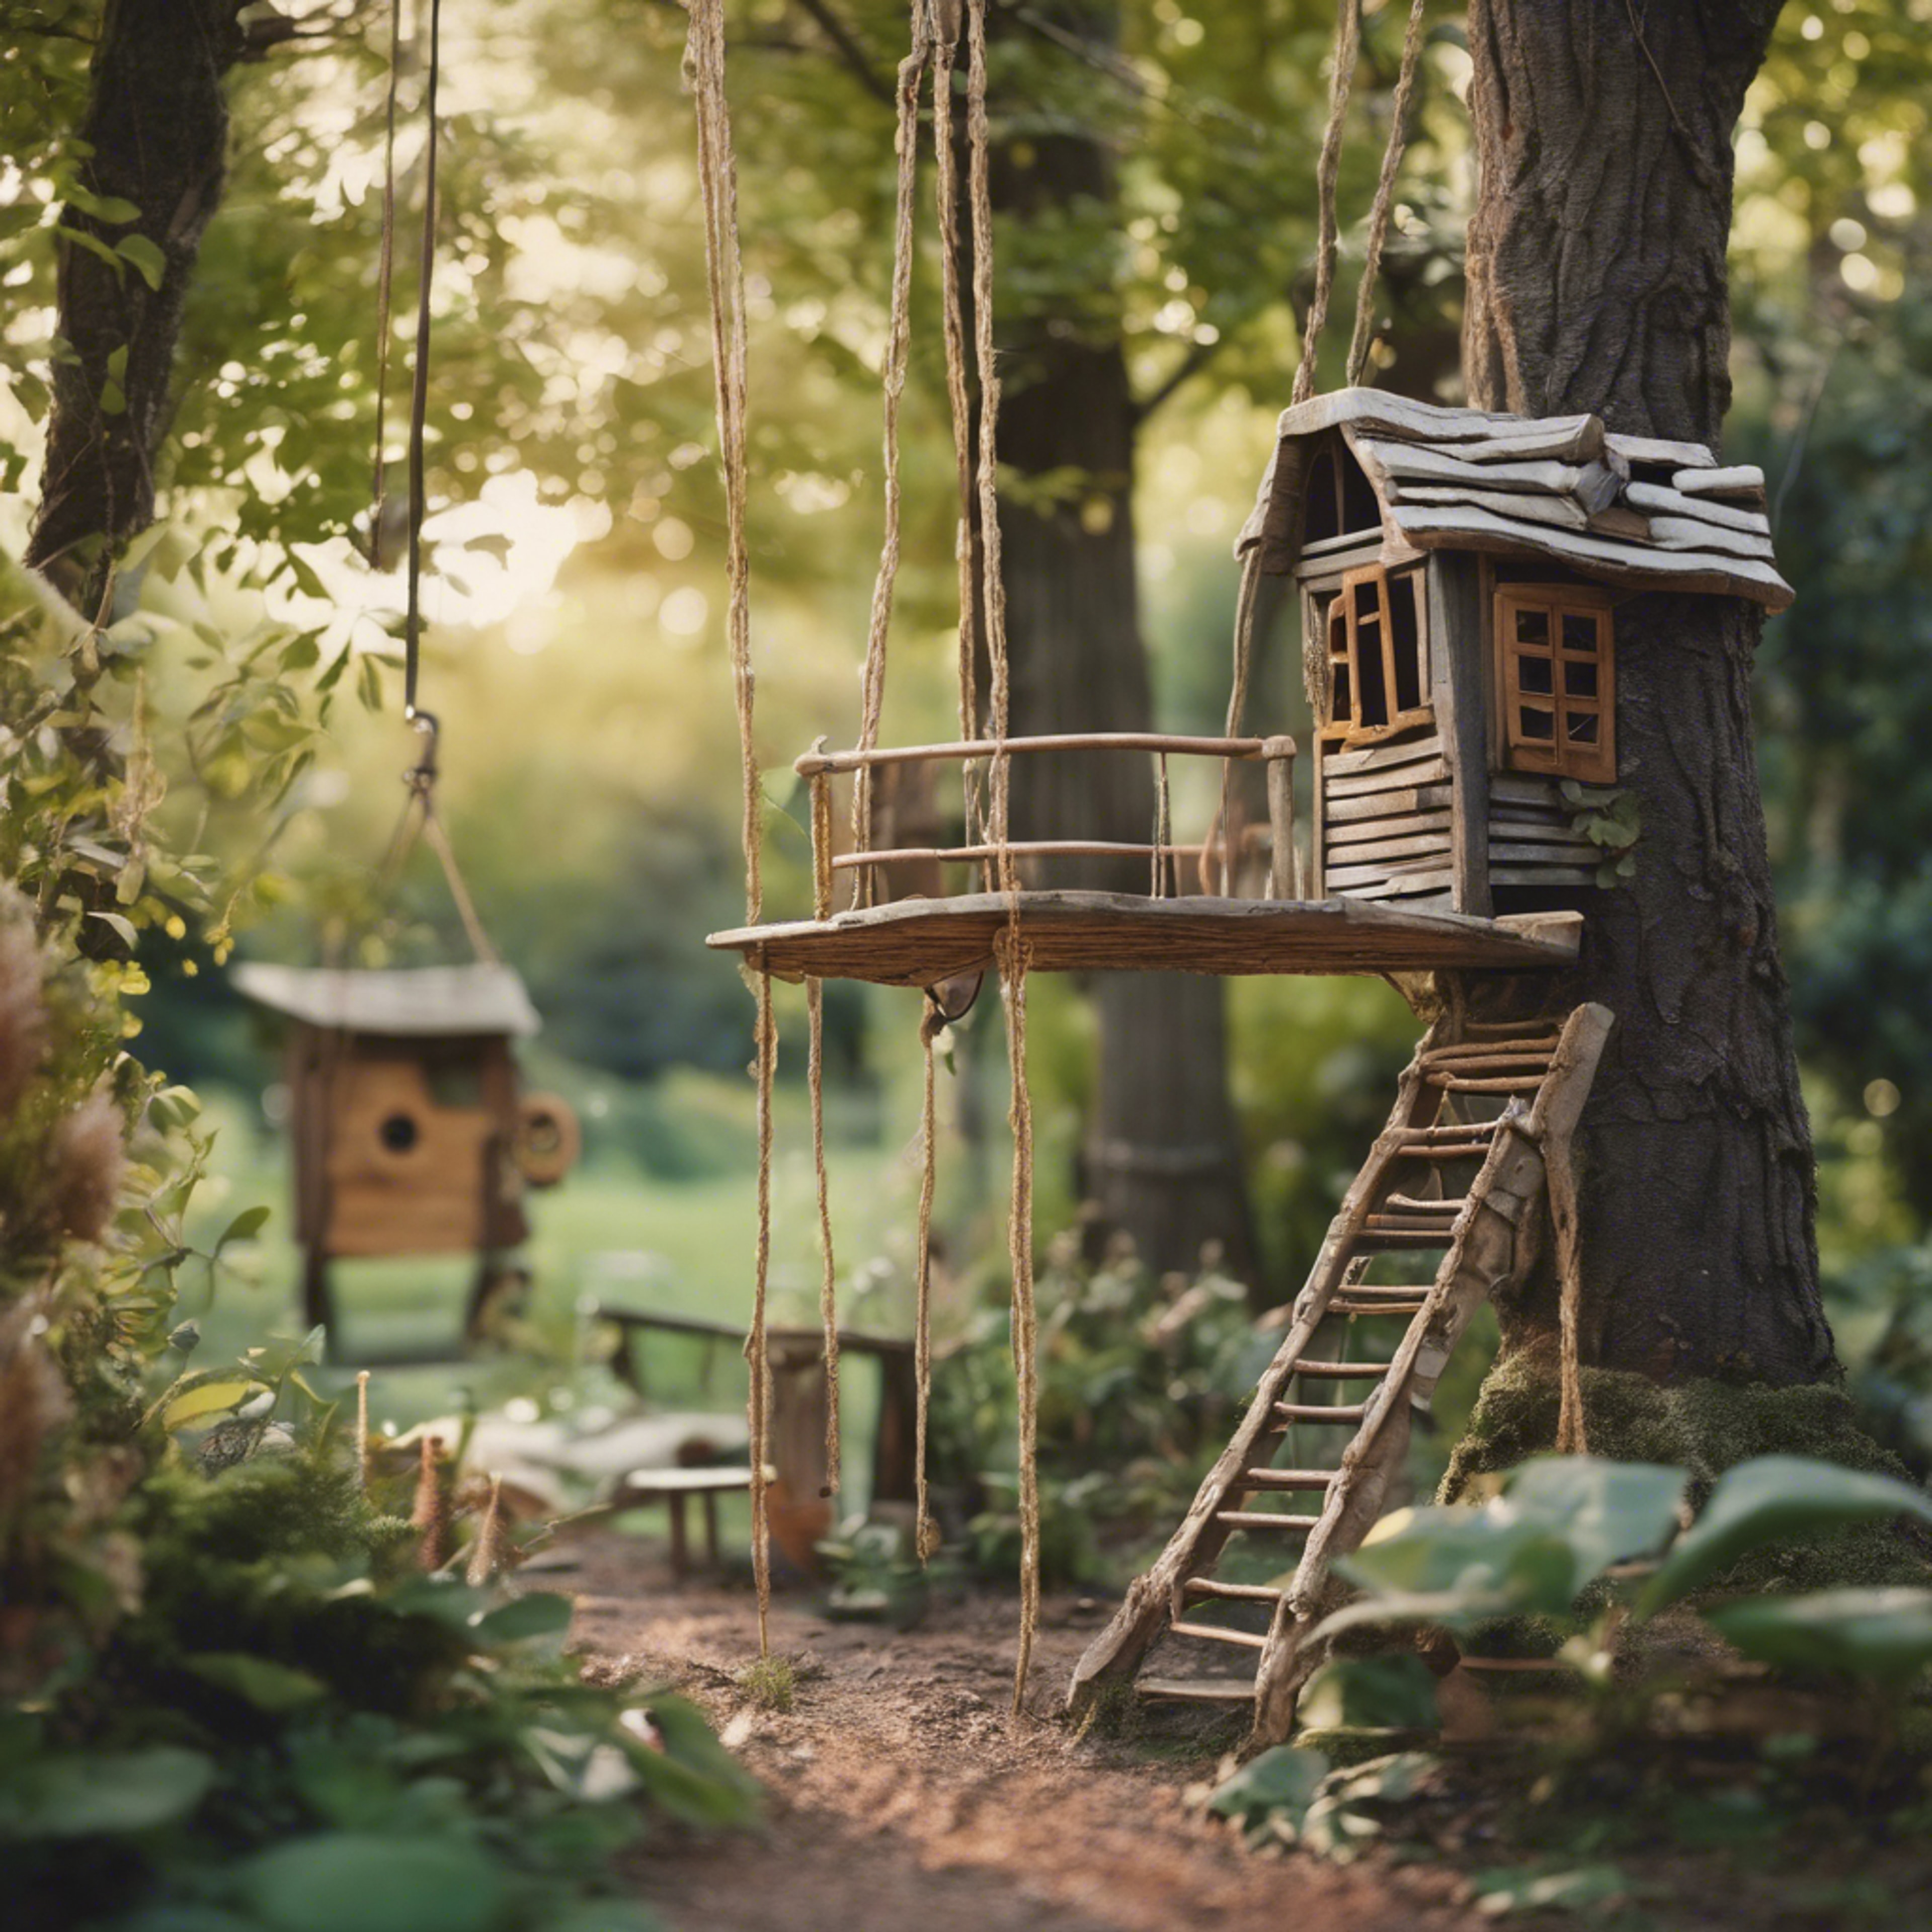 A nostalgic children’s garden filled with hidden treasures, tire swings, and treehouses built amidst towering trees. Tapetai[4077f42451f34ca69b37]